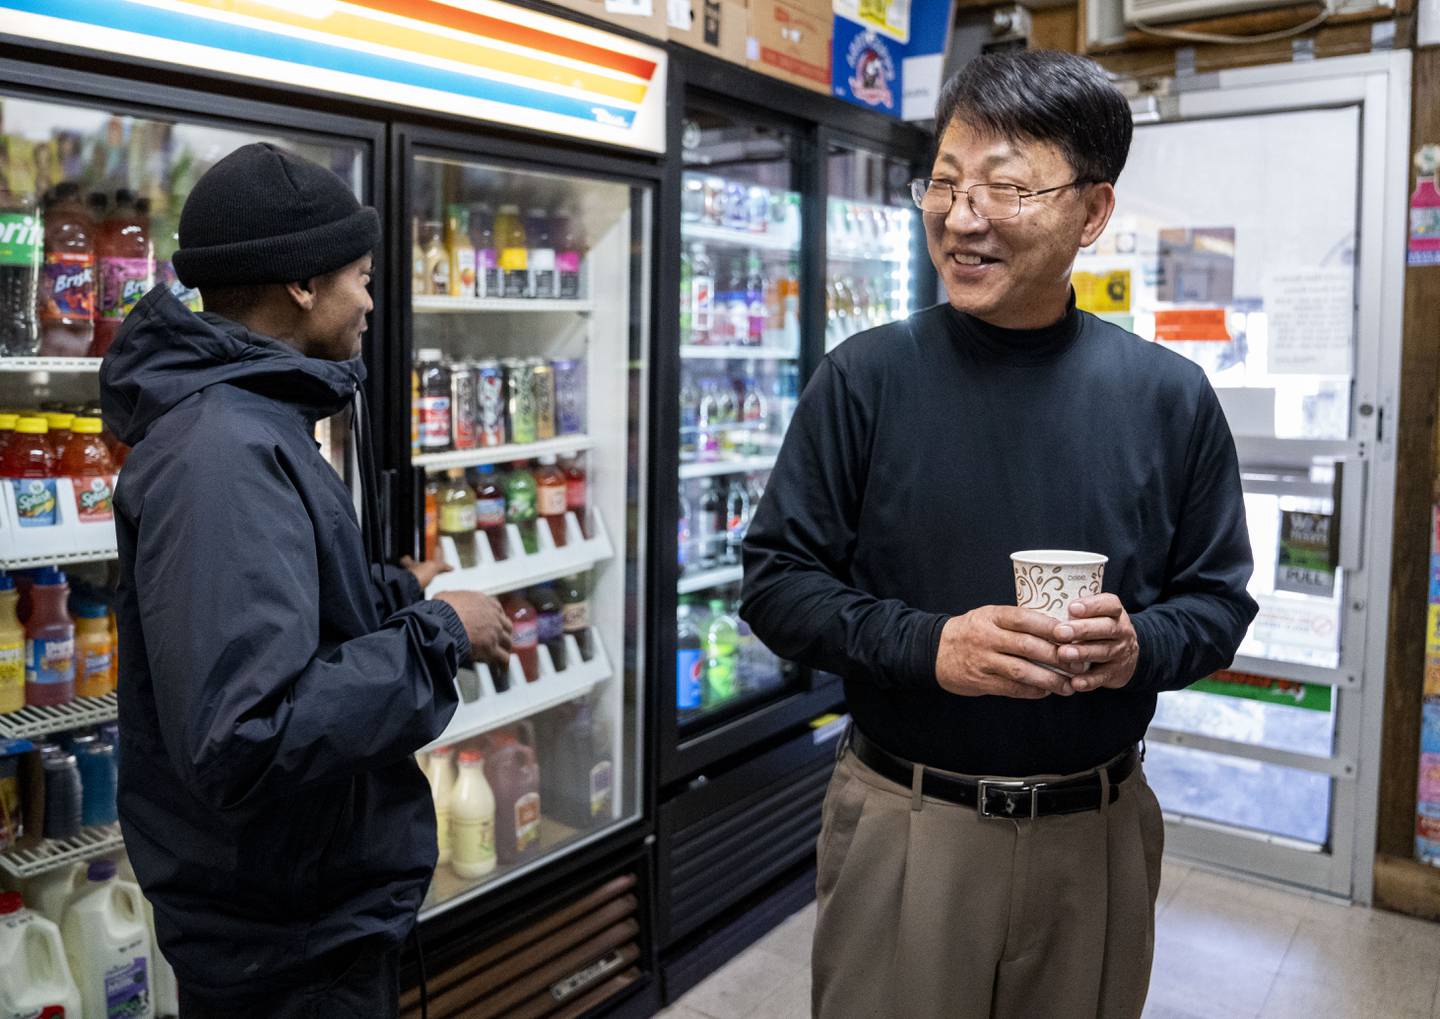 Kevin Lee talks with Anthony Austin, a customer who has been visiting the corner store for year, at Lee's Mini Market, in Baltimore, Thursday, December 1, 2022.